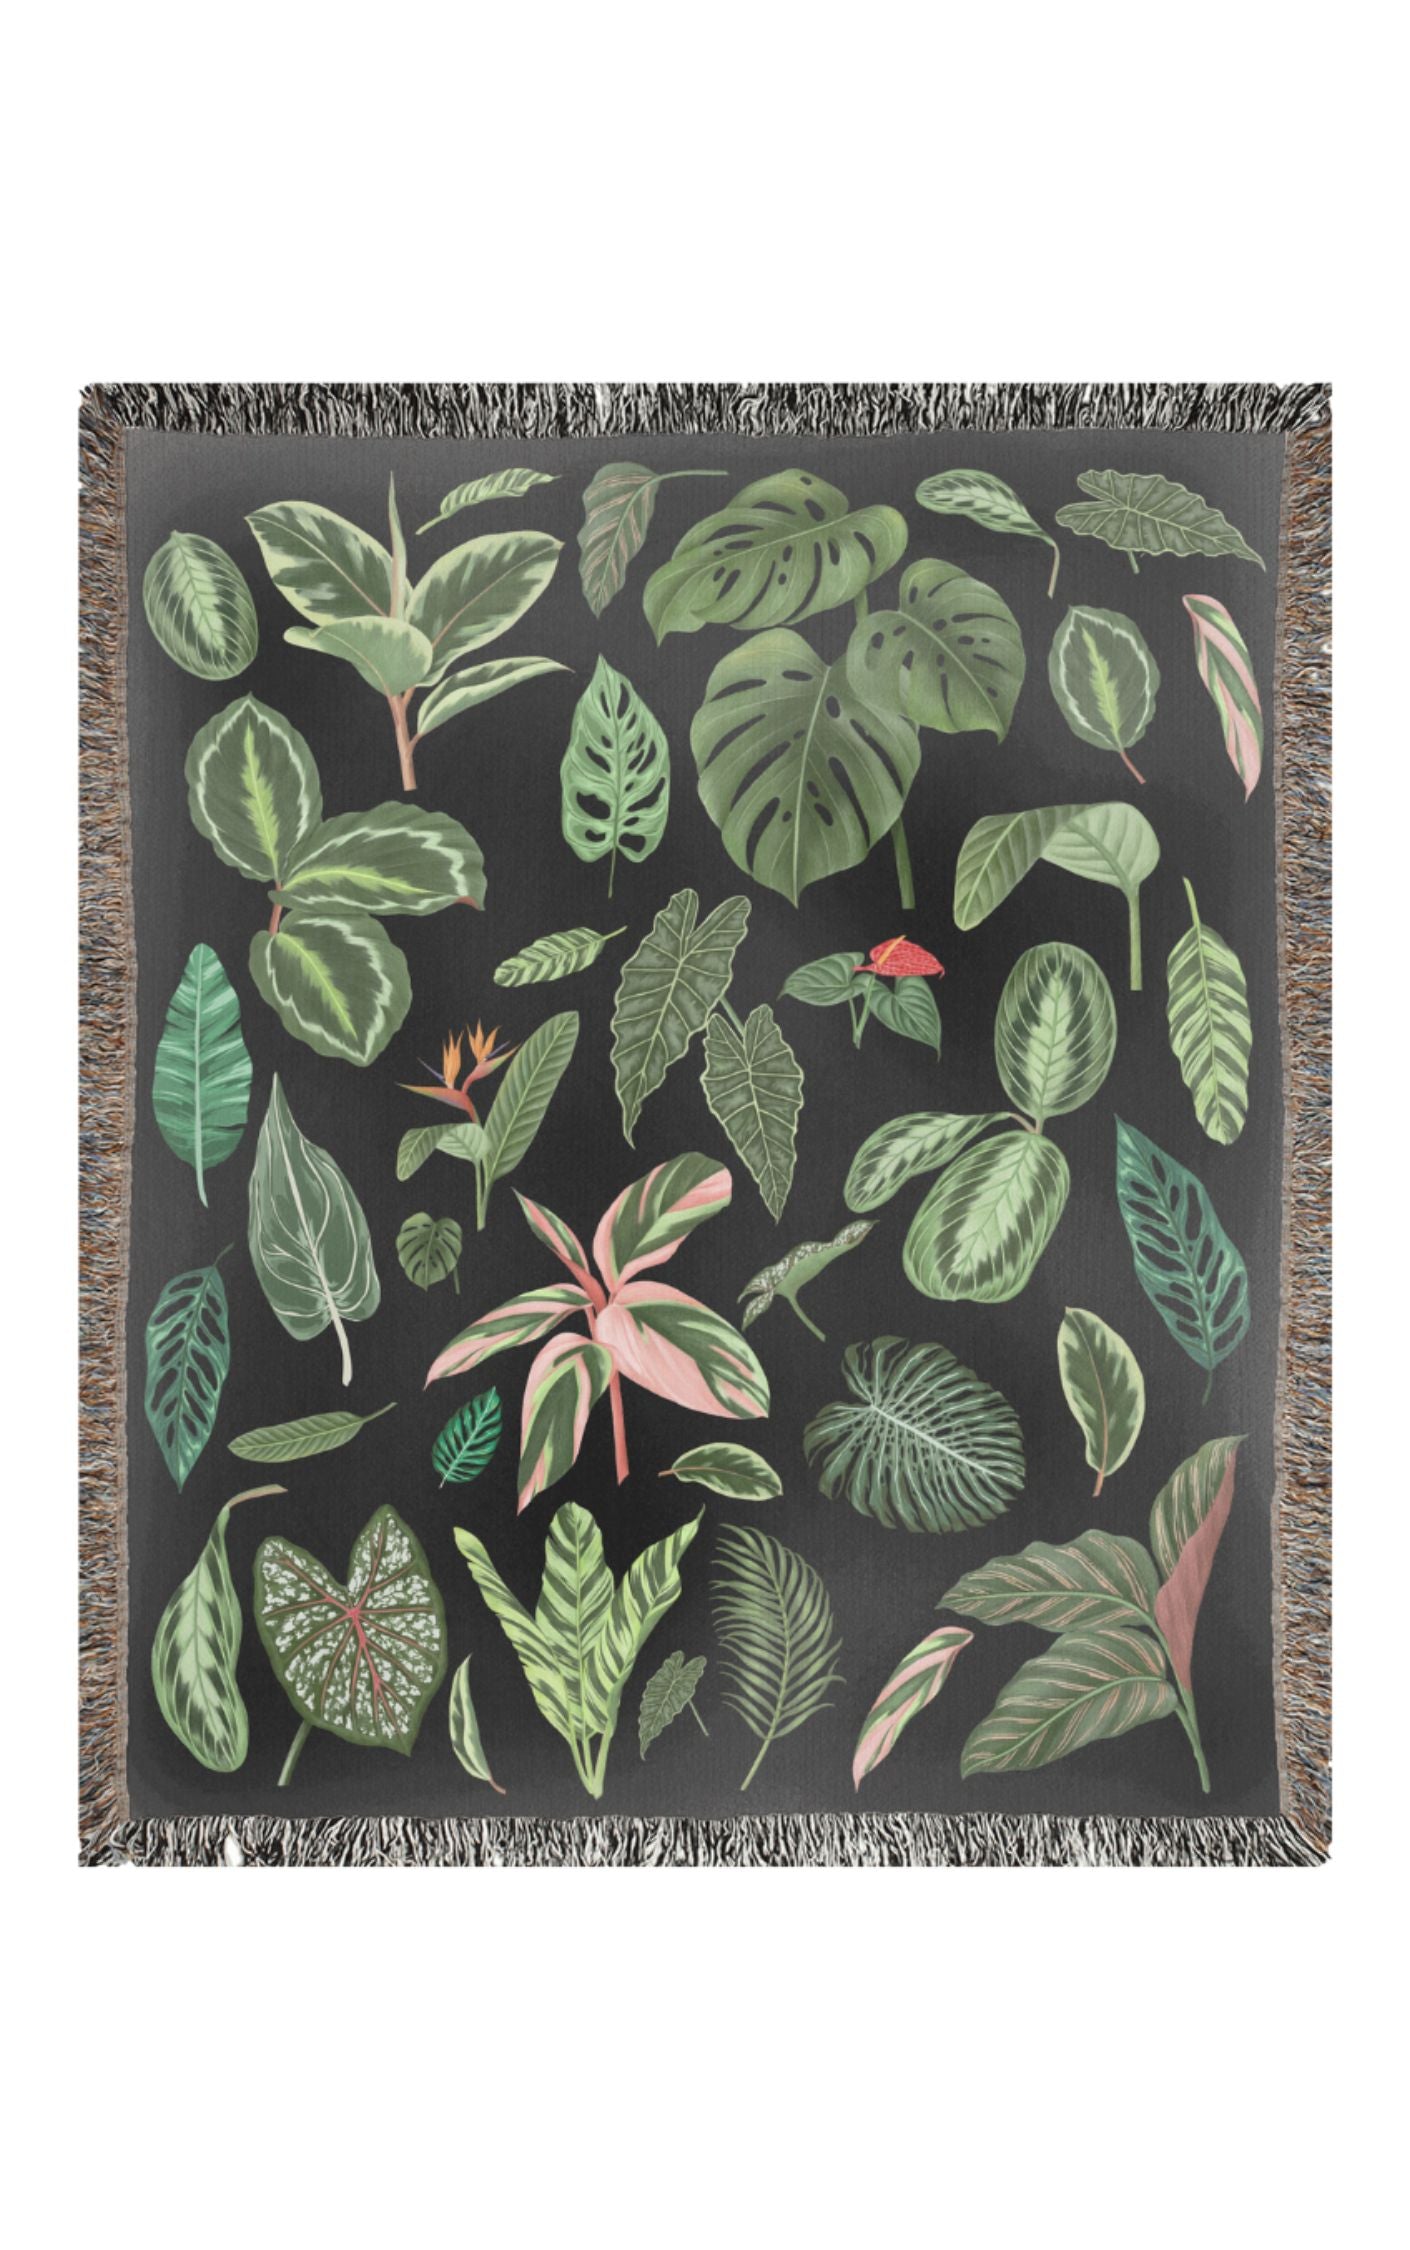 House plants leaves woven blanket 50x60” clearance